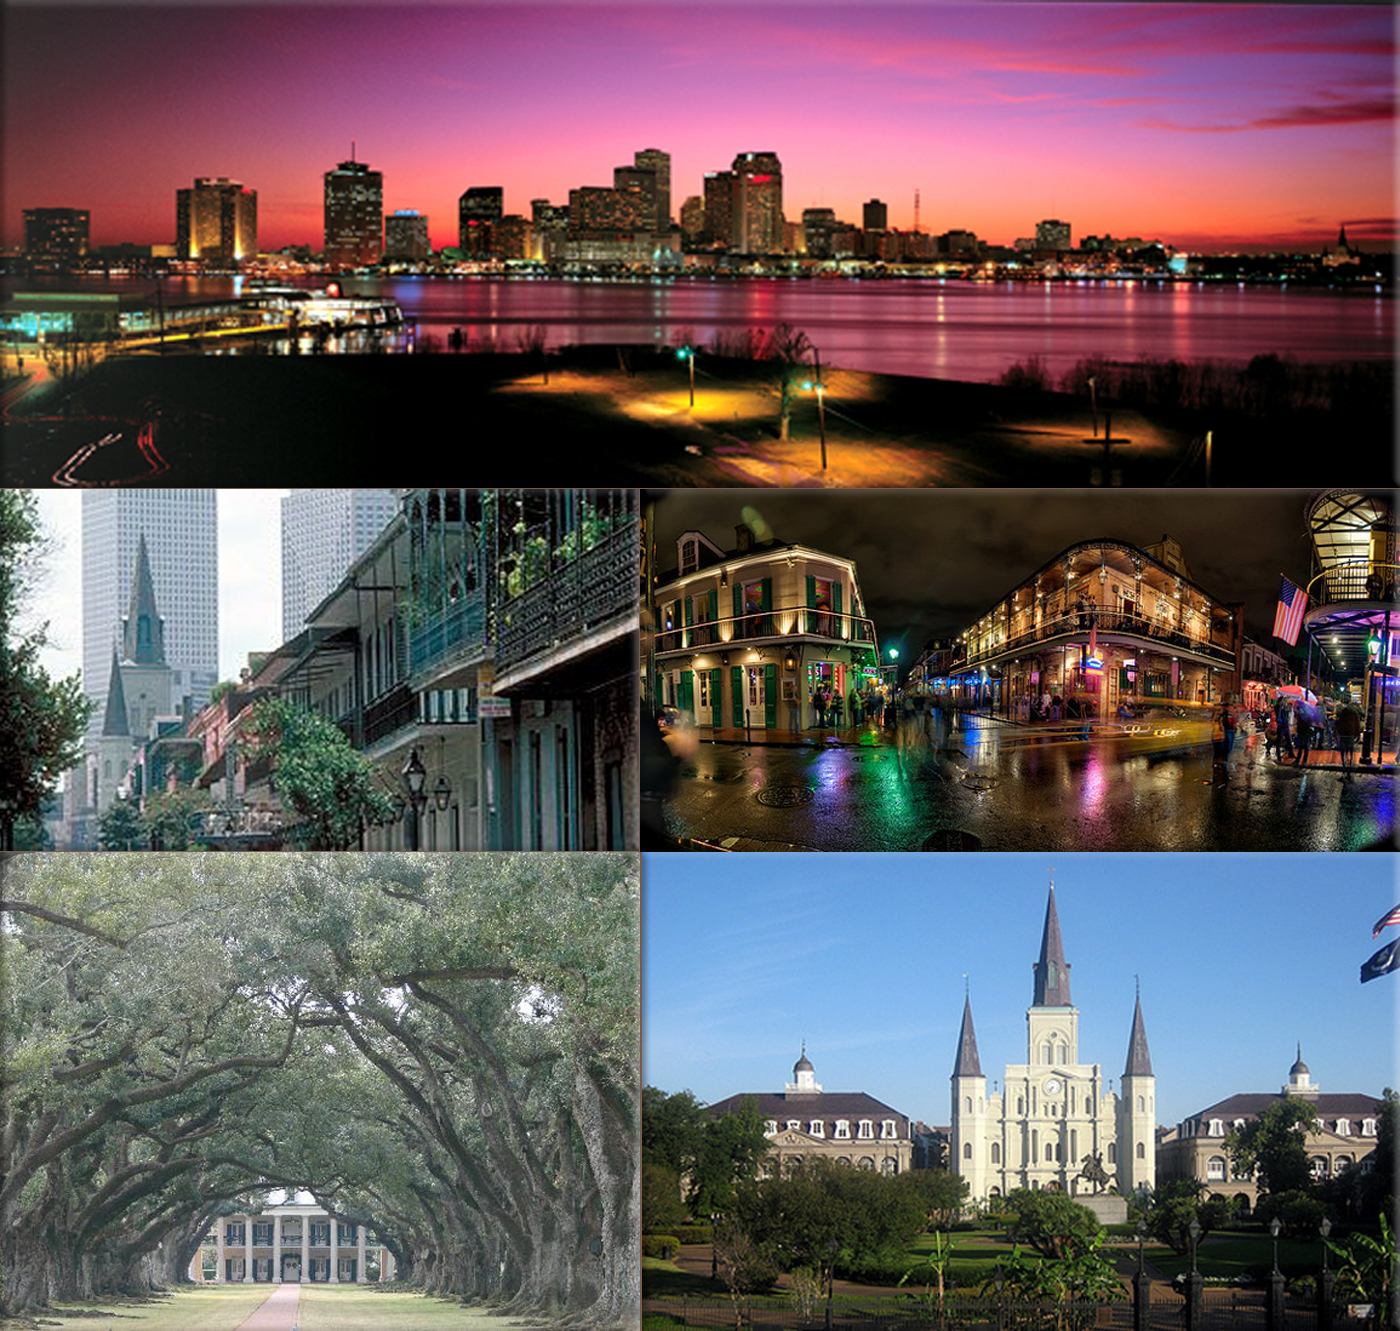 The city of New Orleans is founded by Jean-Baptiste Le Moyne de Bienville on May 7th, 1718